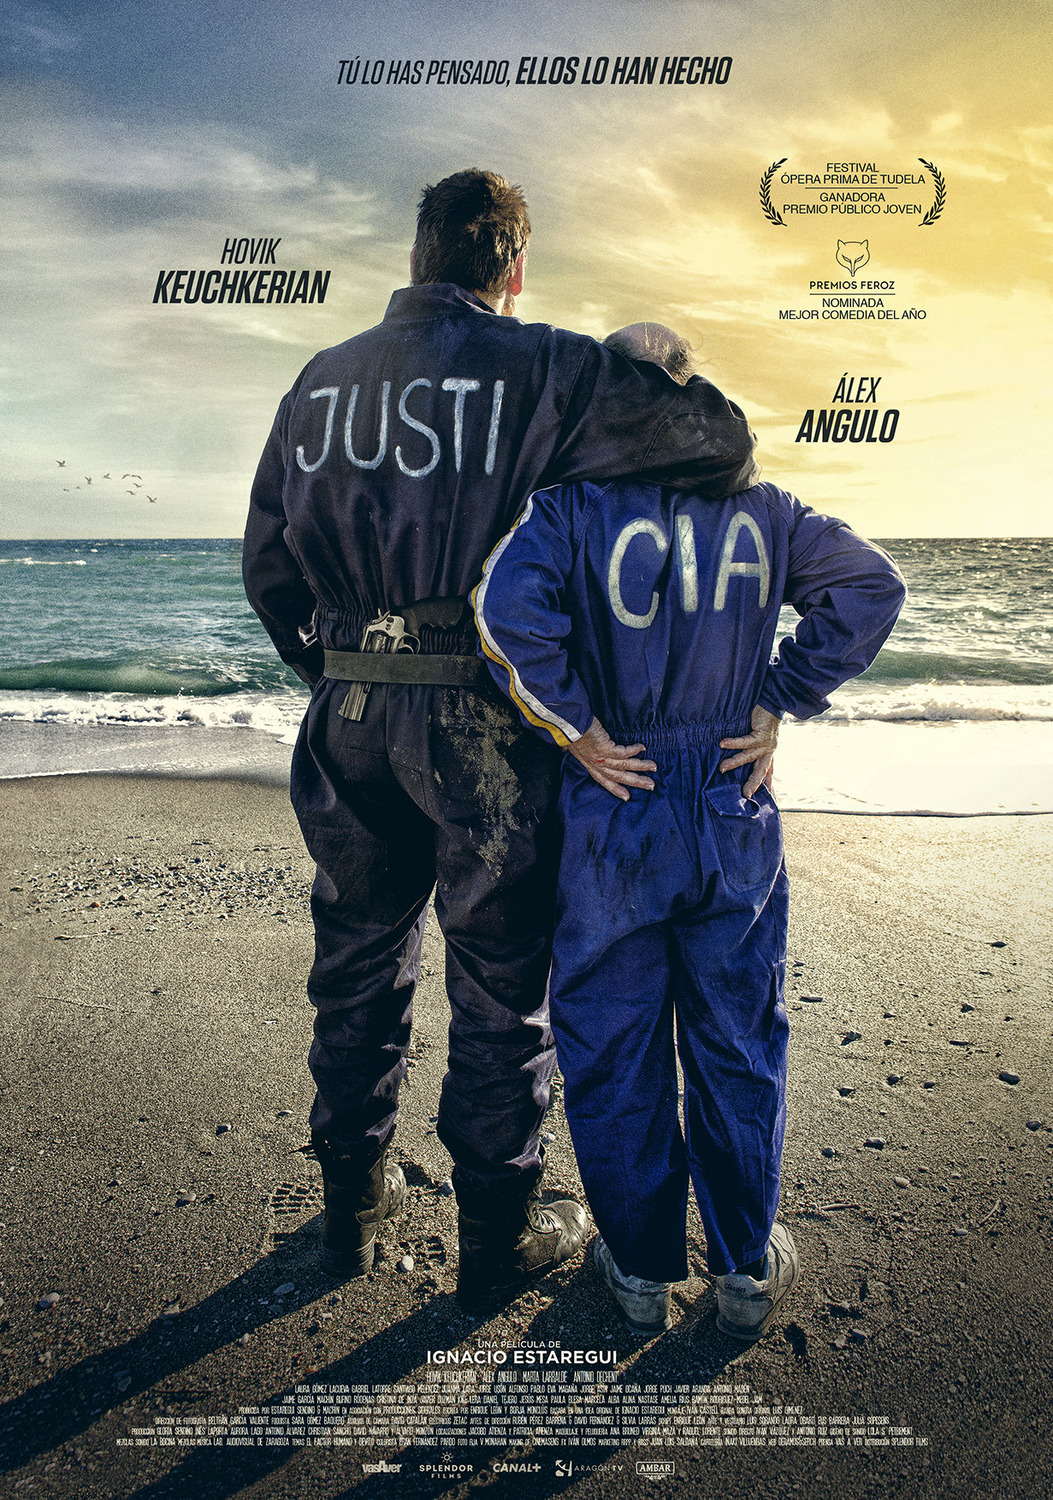 Extra Large Movie Poster Image for Justi&Cia 